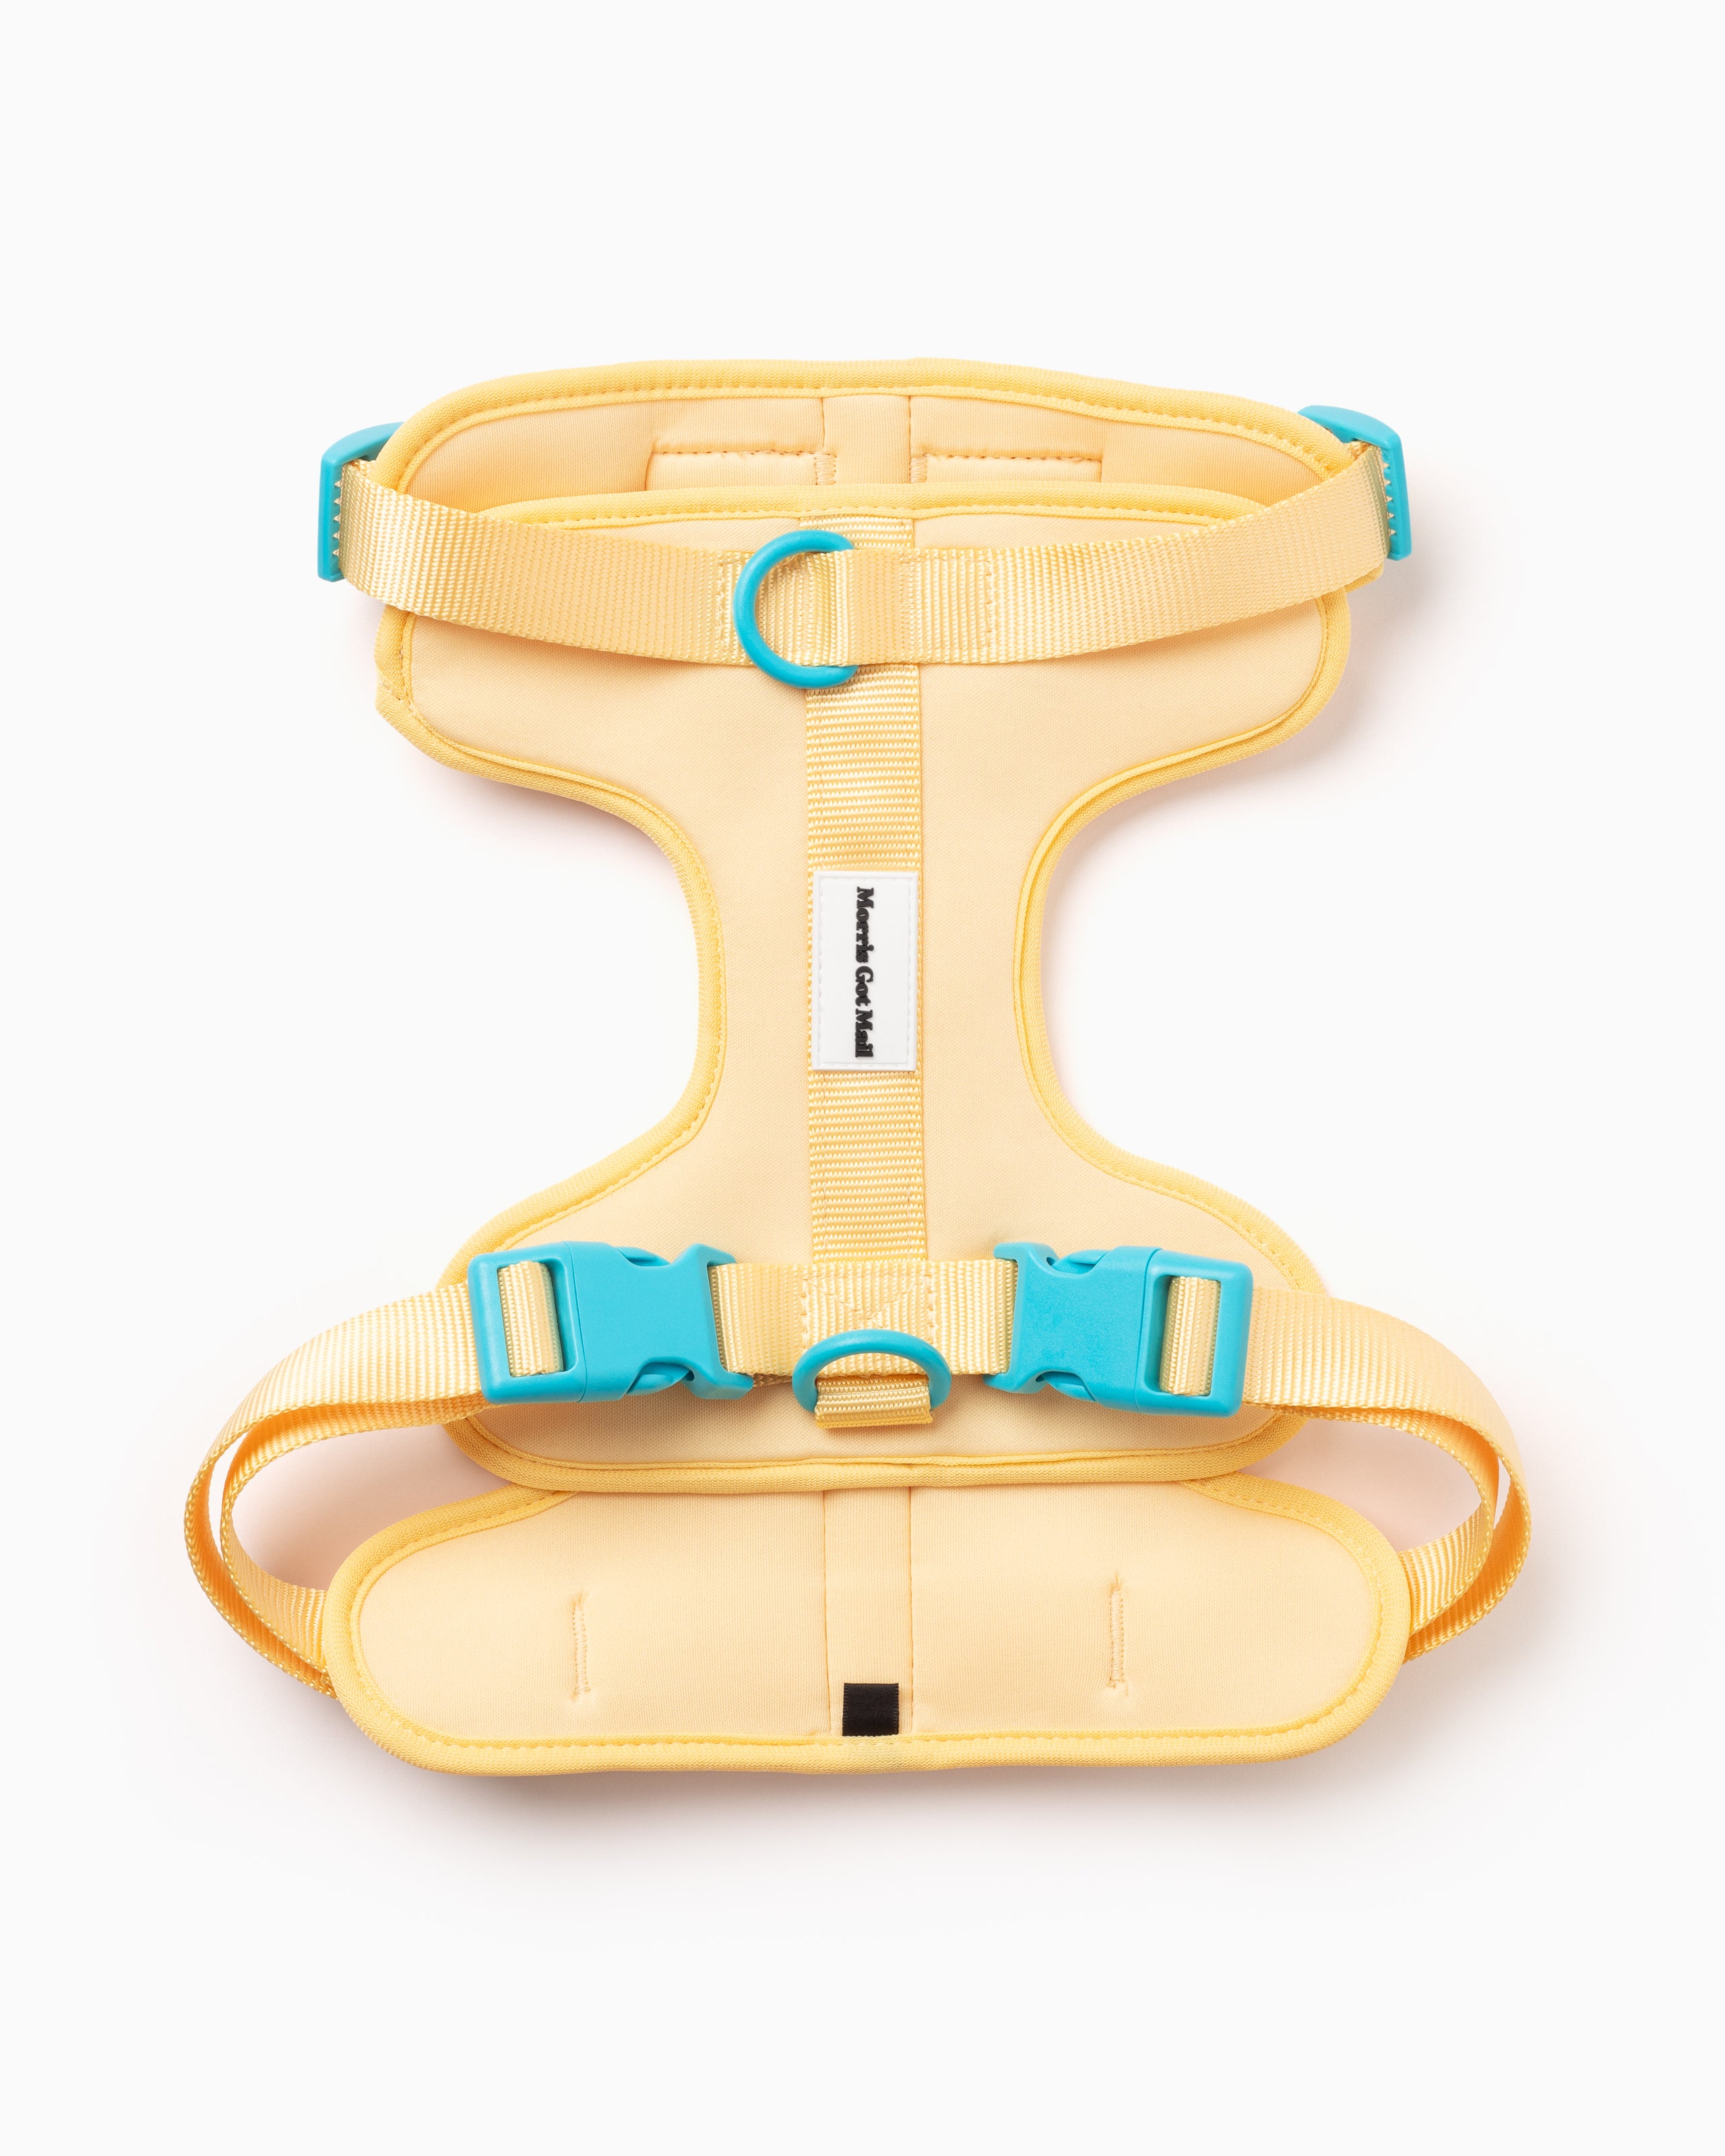 Butter Yellow Color Block Flexible Dog Harness, Butter, Yellow, Color, Block, Flexible Dog, Harness